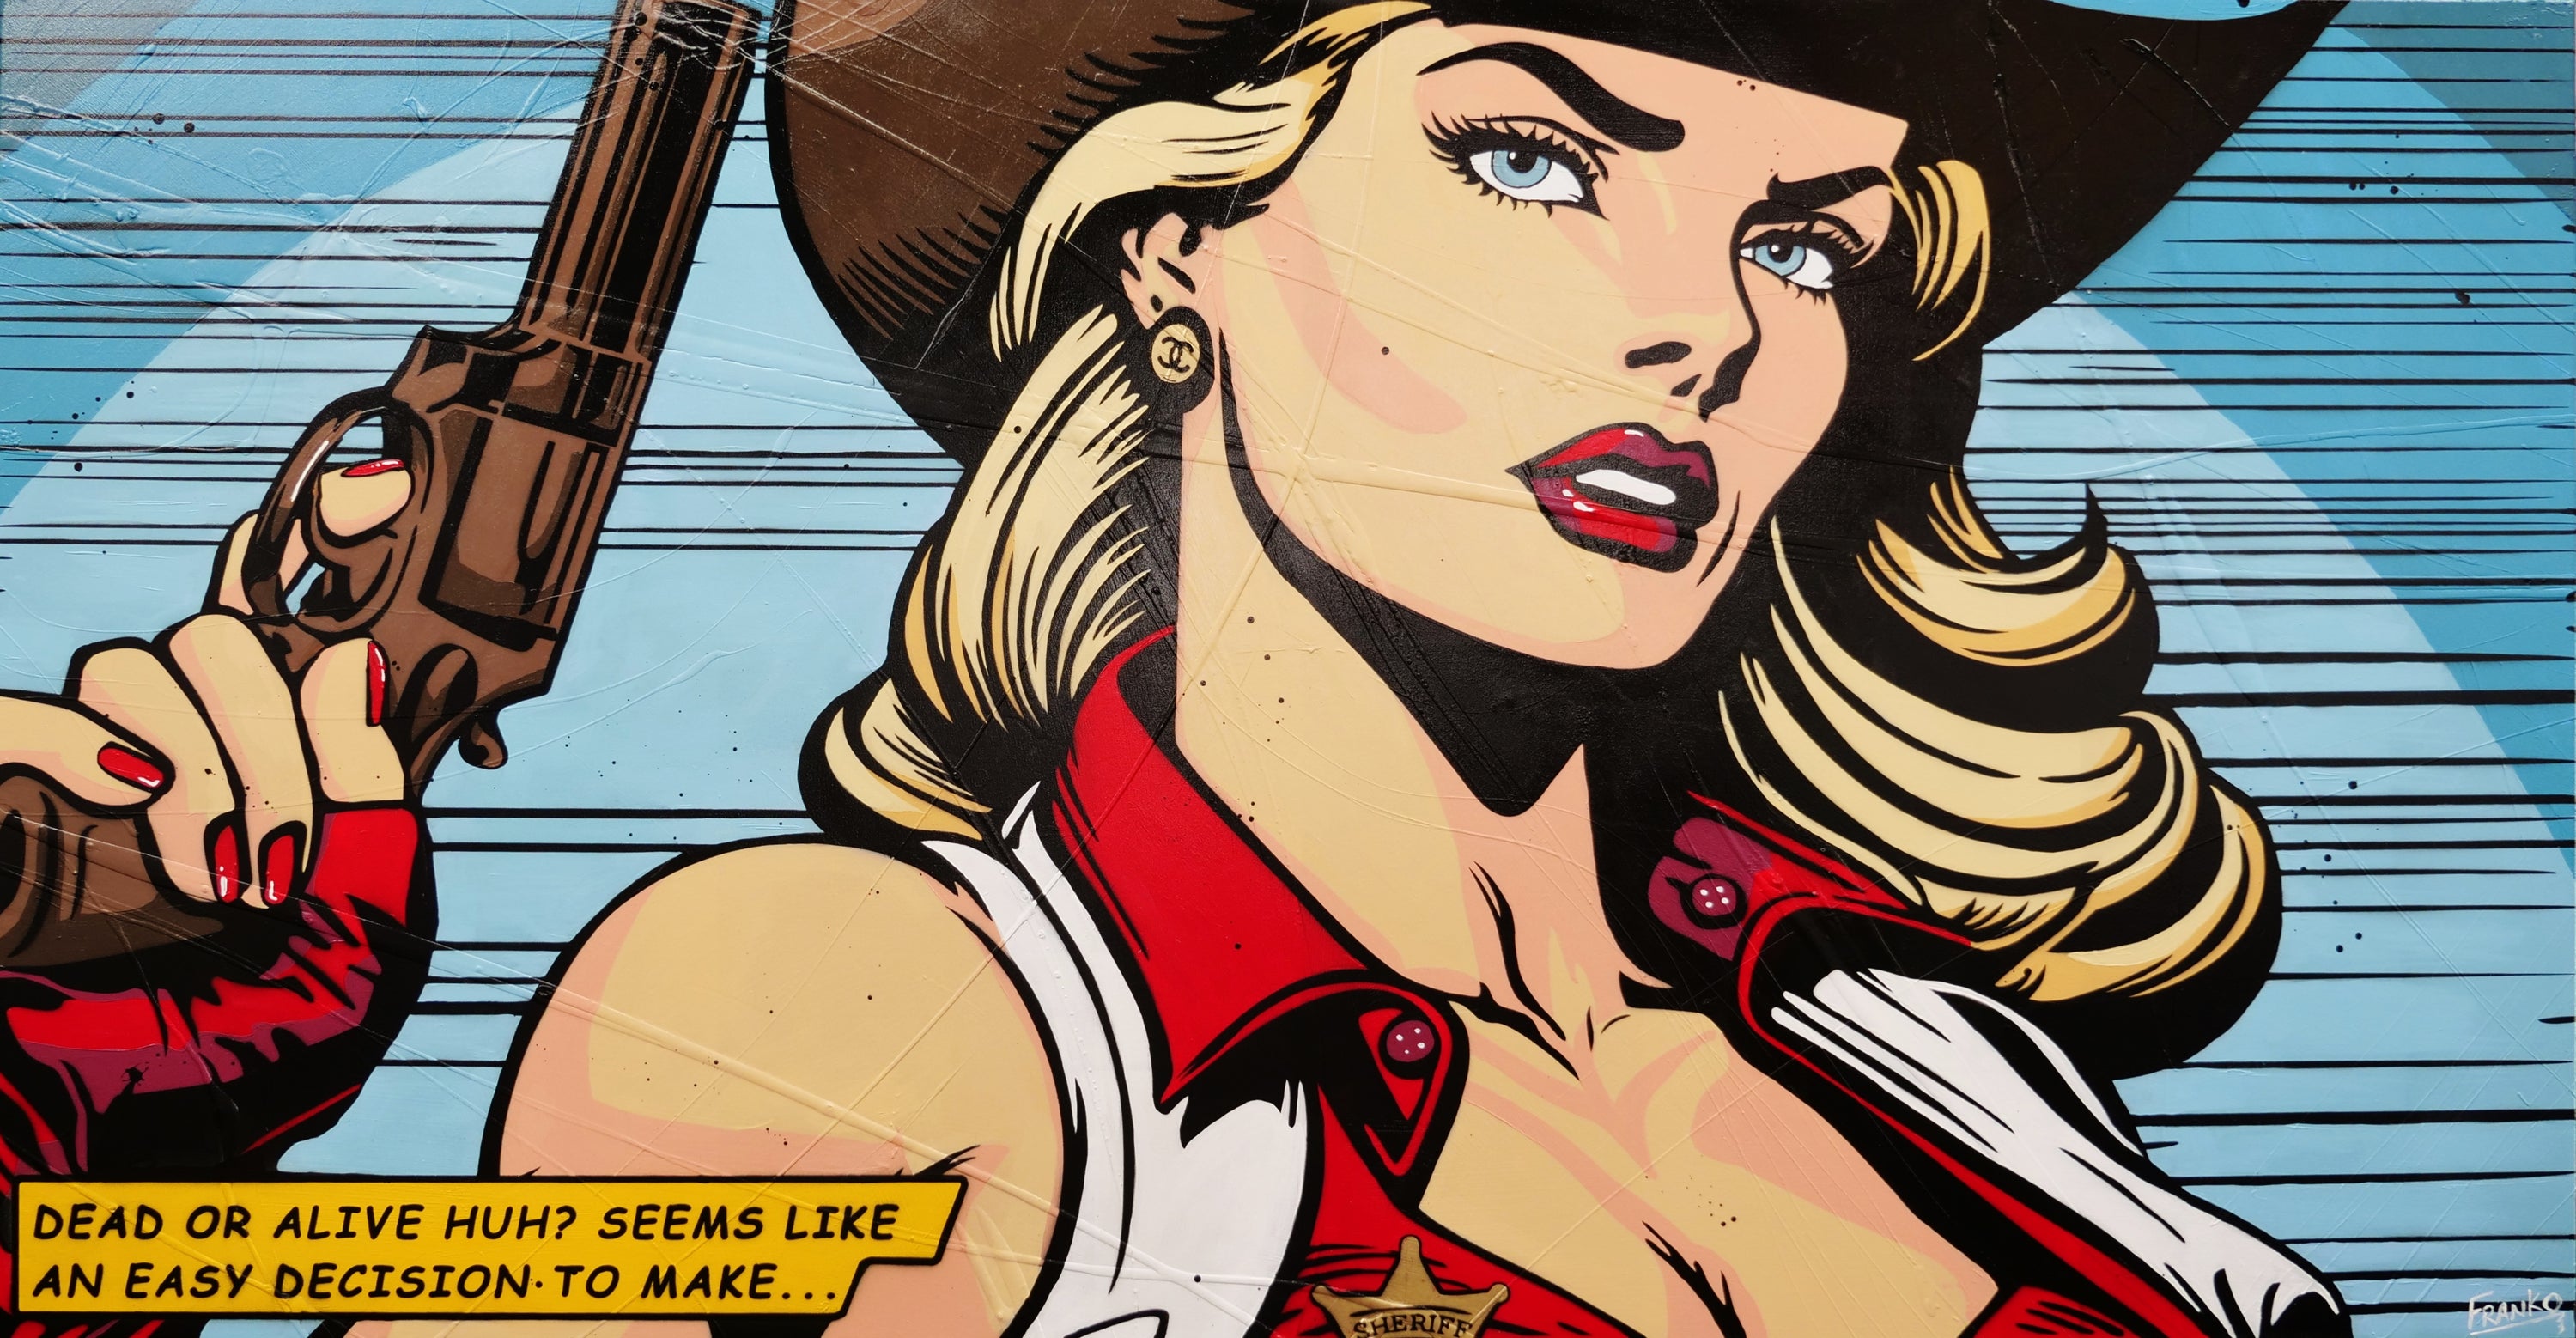 Dead or Alive 190cm x 100cm Cowgirl Textured Urban Pop Art Painting (SOLD)